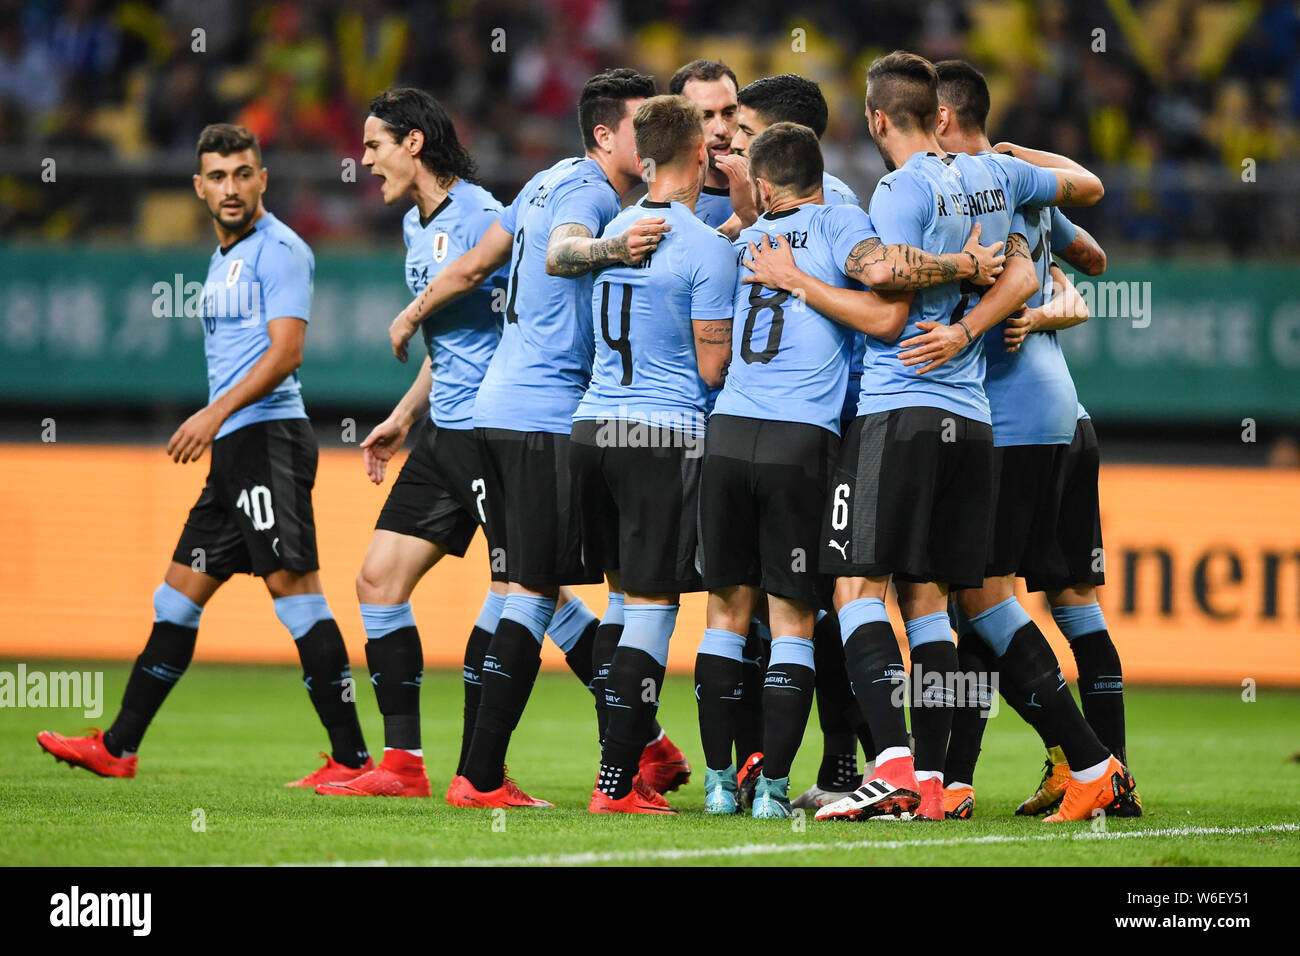 Players of Uruguay national football team celebrate after scoring against Czech Republic national football team in their semi-final match during the 2 Stock Photo